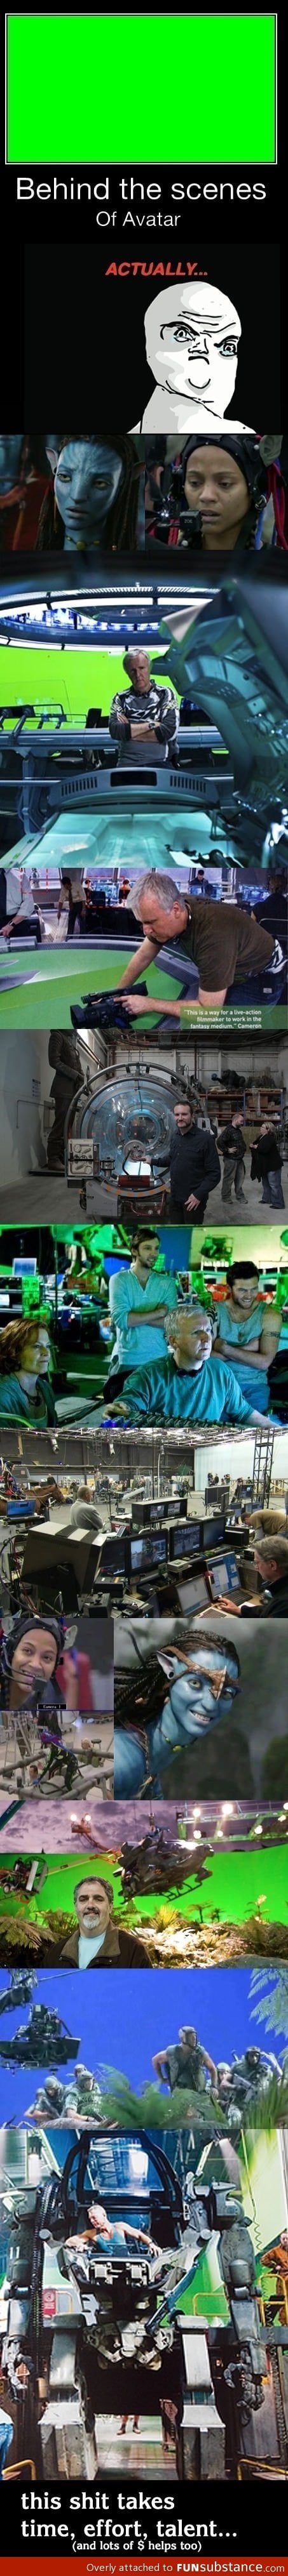 Behind the scenes of avatar